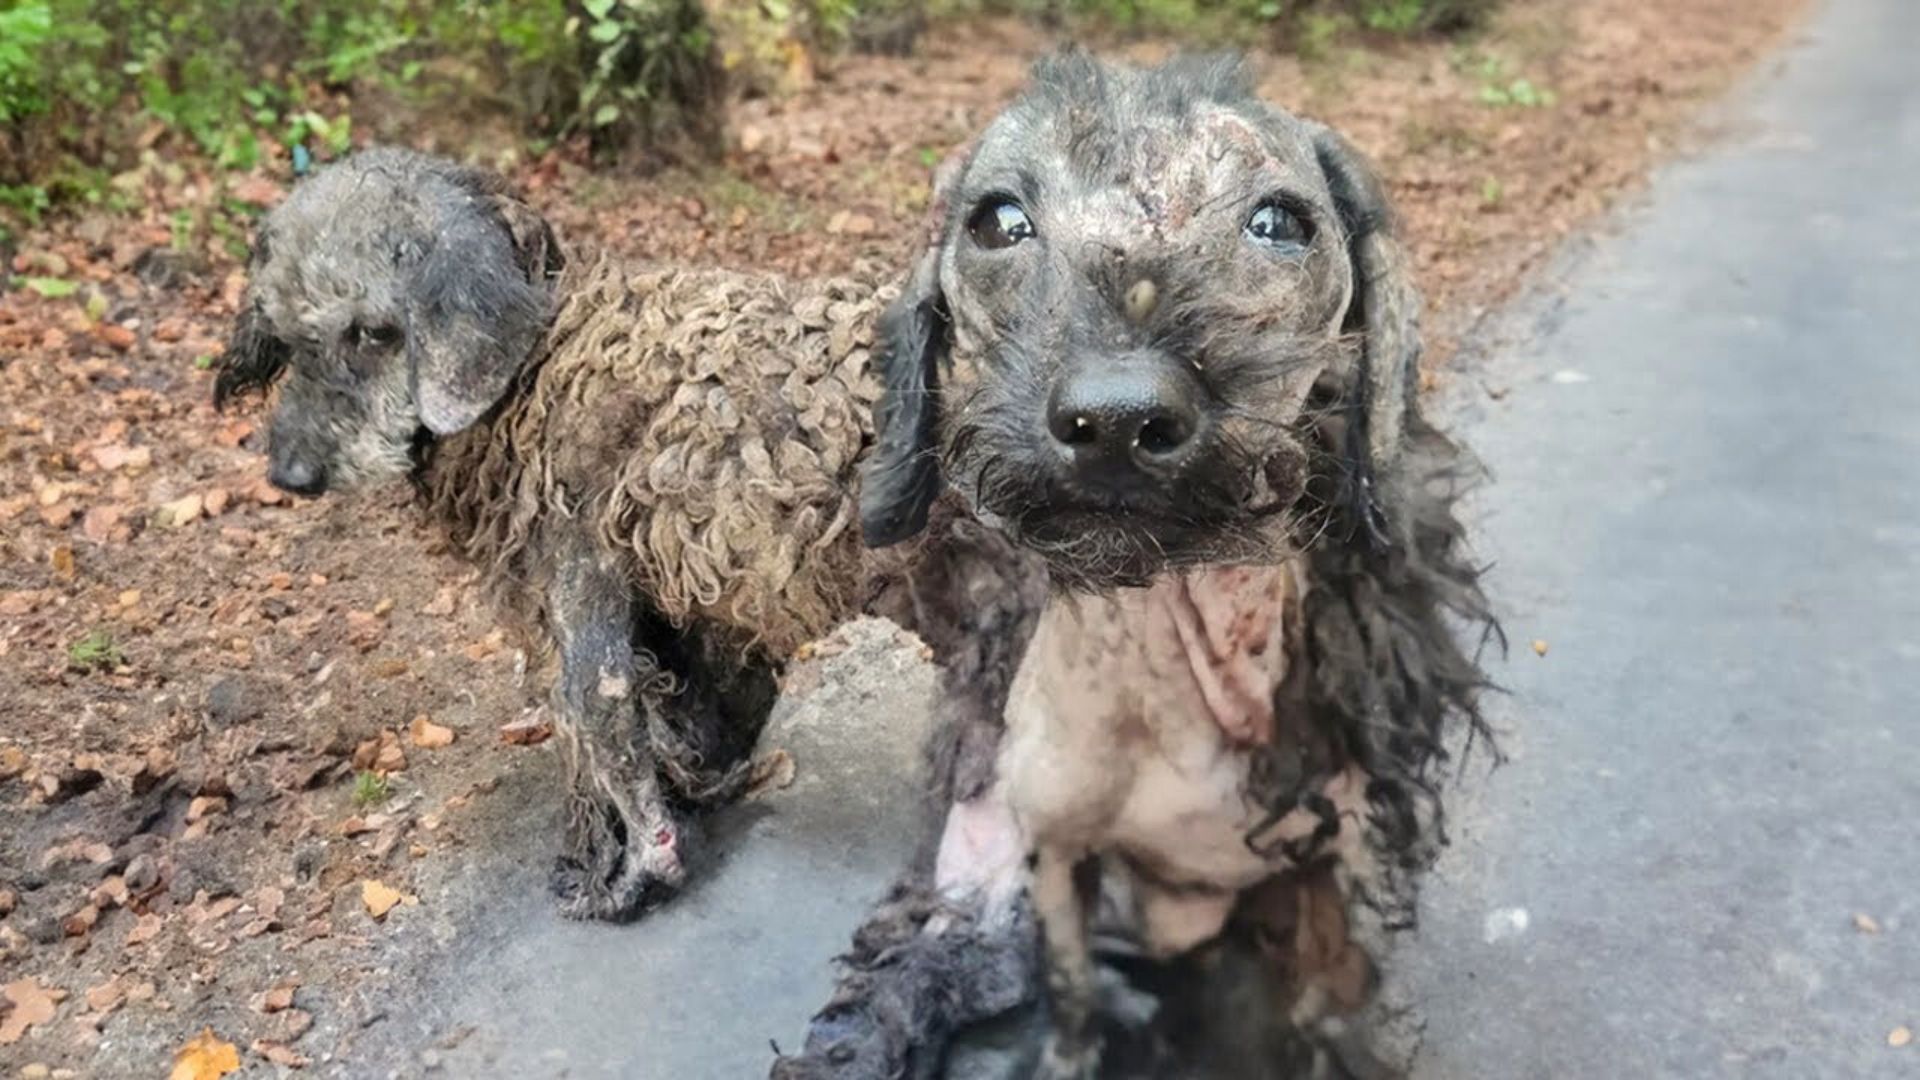 Two Neglected Pups Kept Looking At Their Rescuer With The Saddest Eyes, Pleading For Help